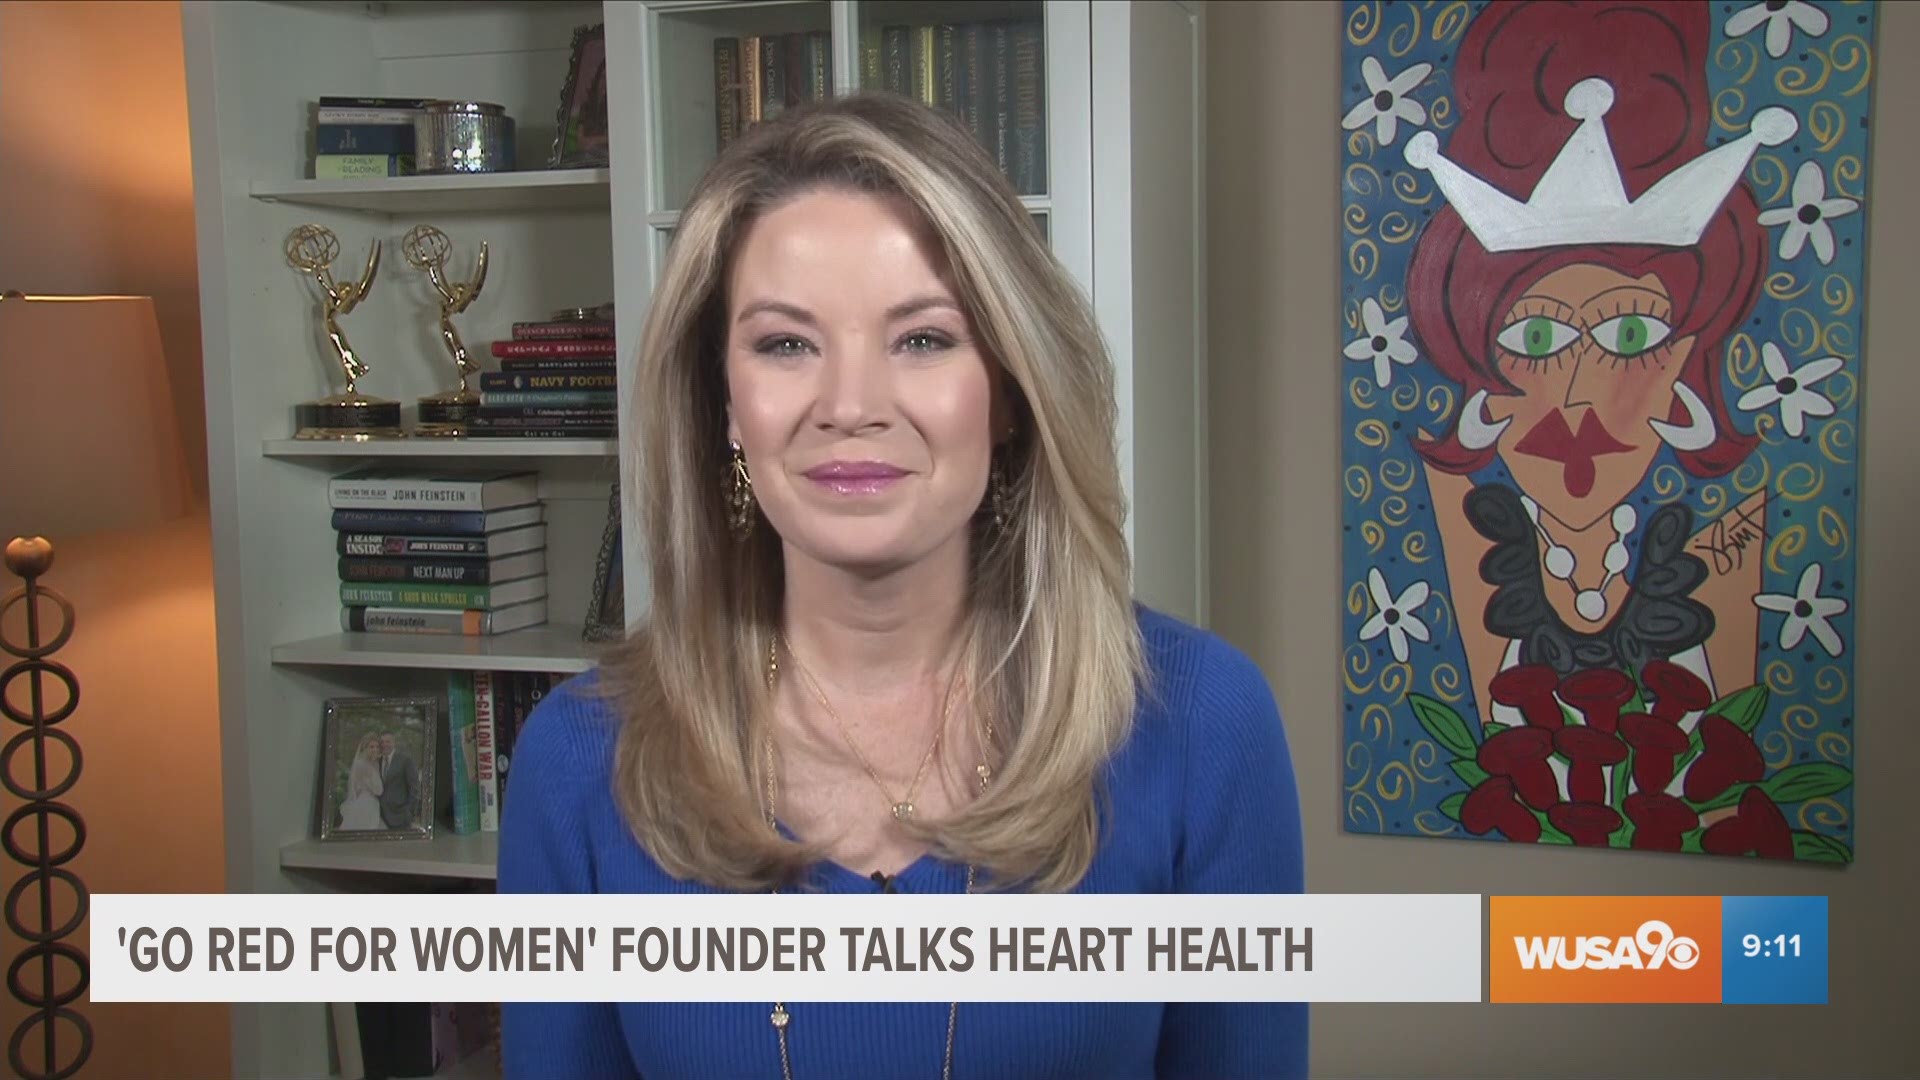 Today is the beginning of American Heart Month. Dr. Nieca Goldberg, Medical Director of NYU's Women's Heart Program, shares an important message for young women.